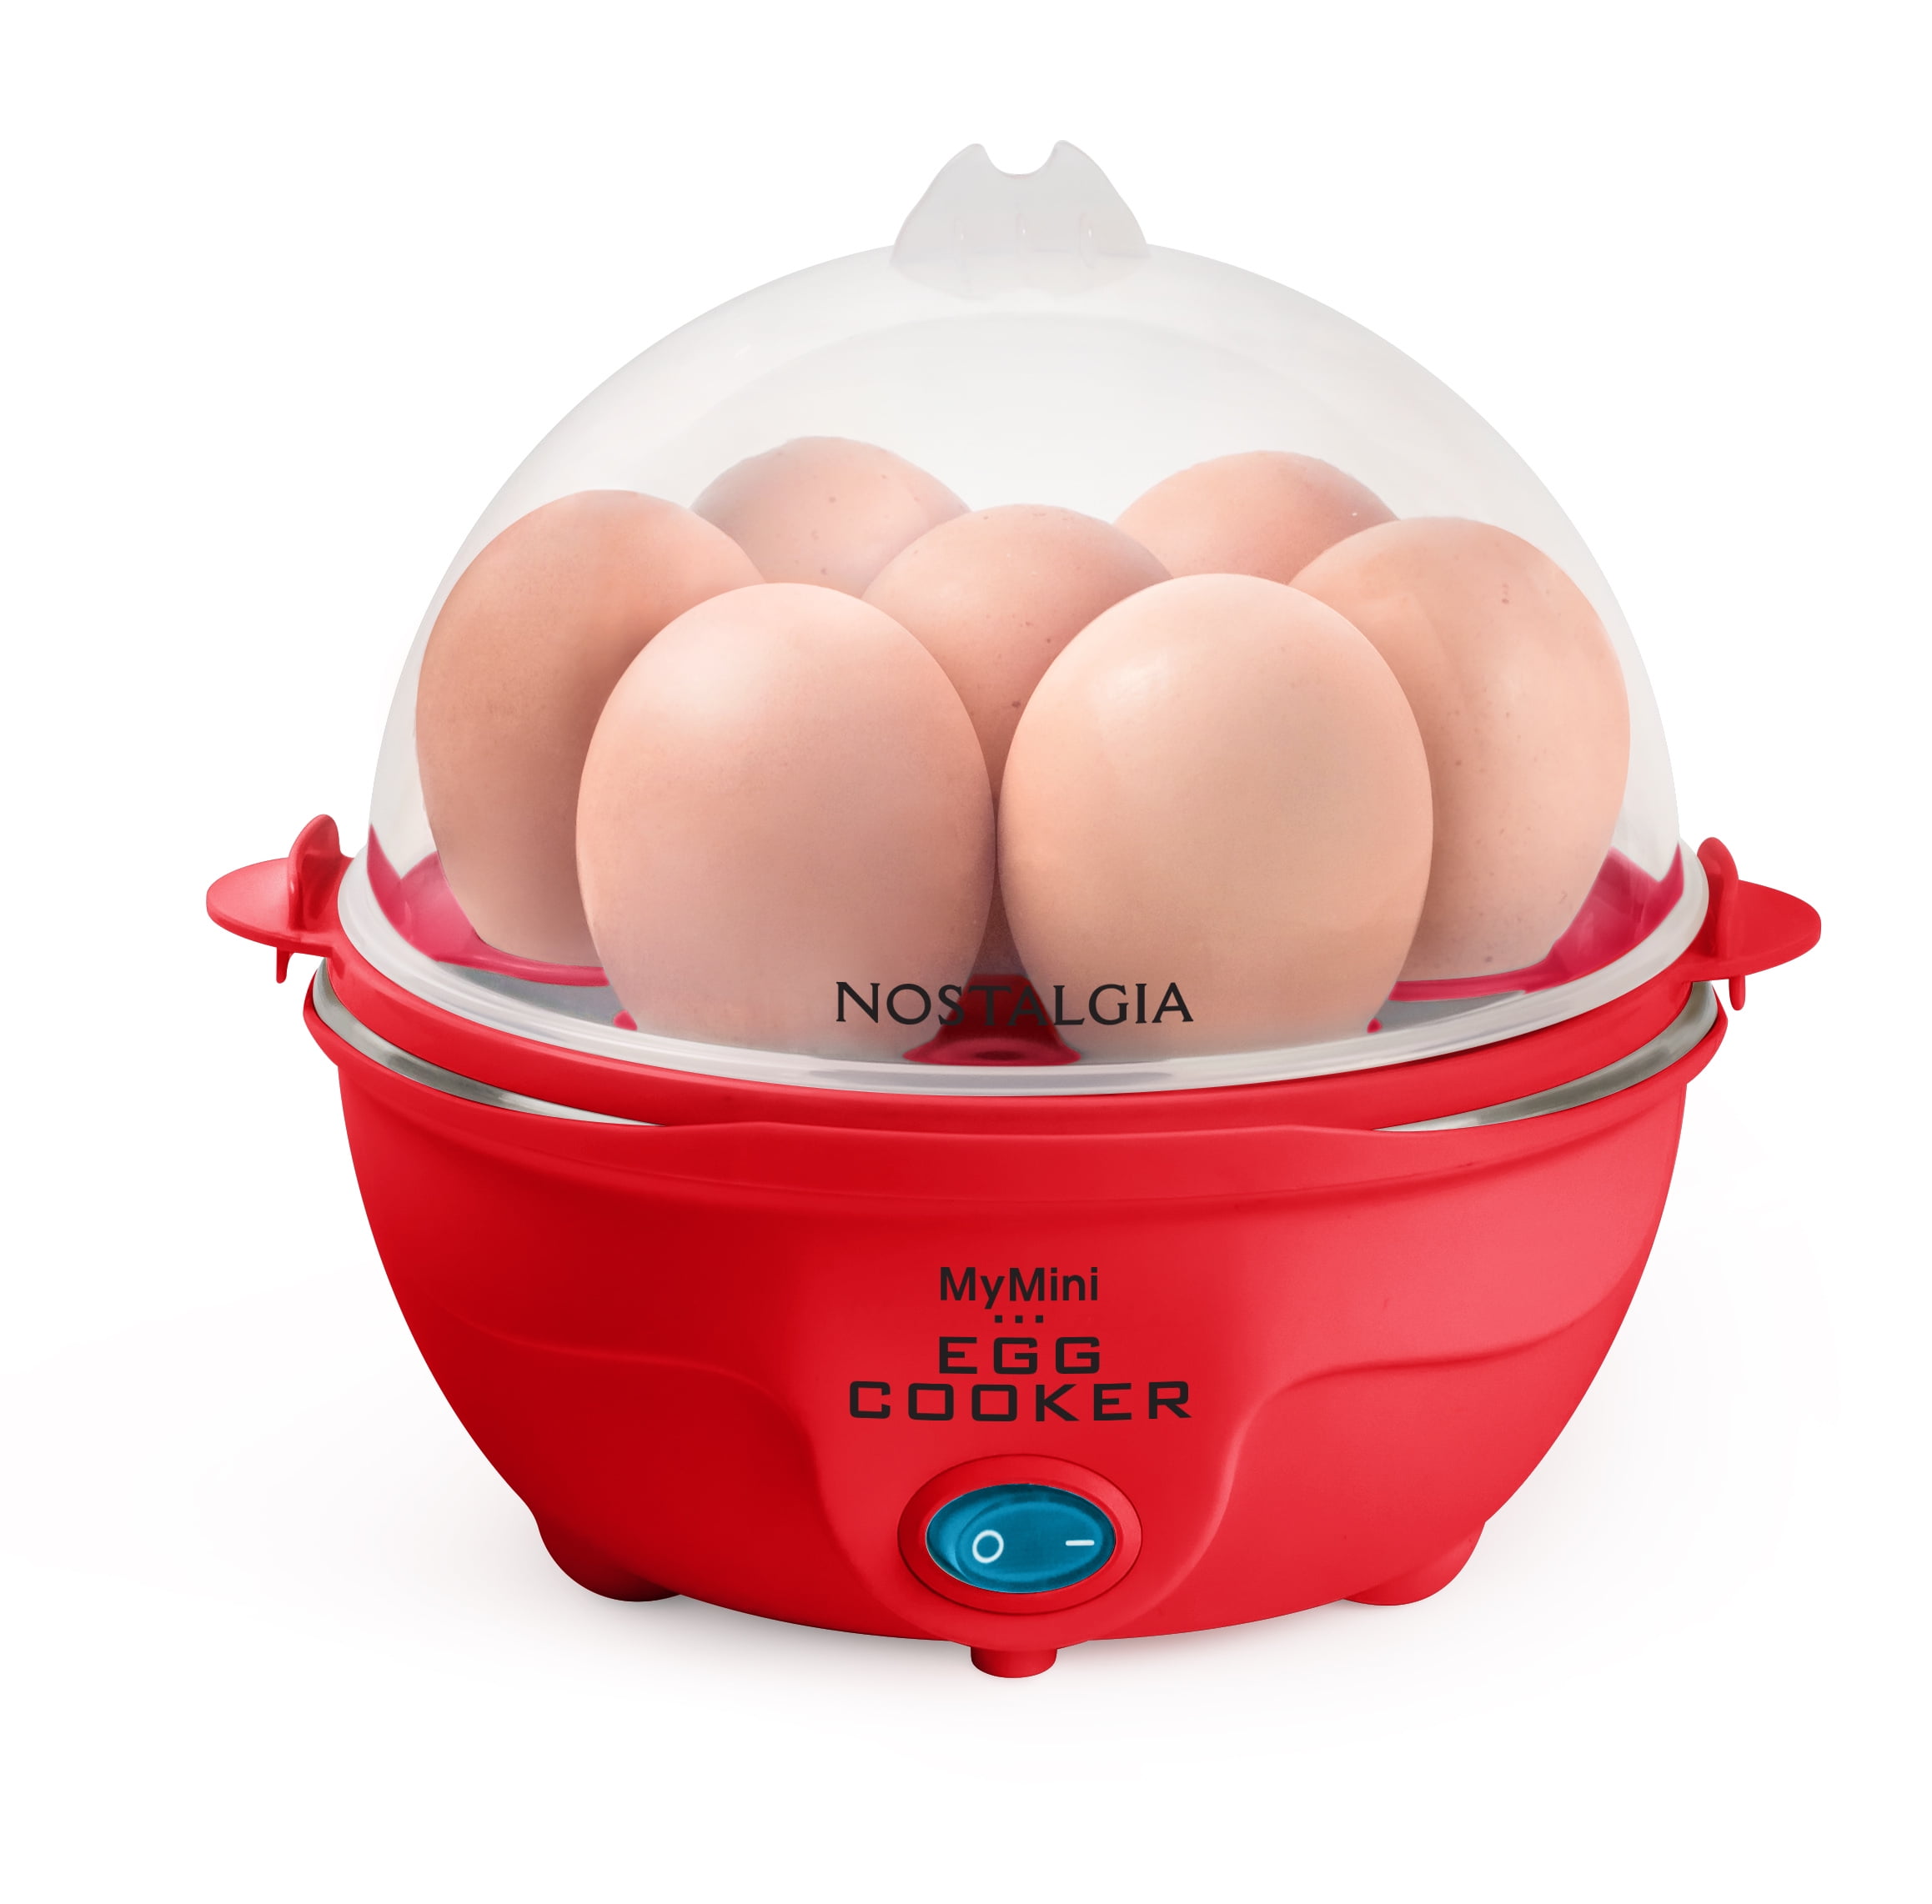 Nostalgia Mymini 7-egg Cooler, Cook Perfect Eggs Every Time Red Reviews 2024